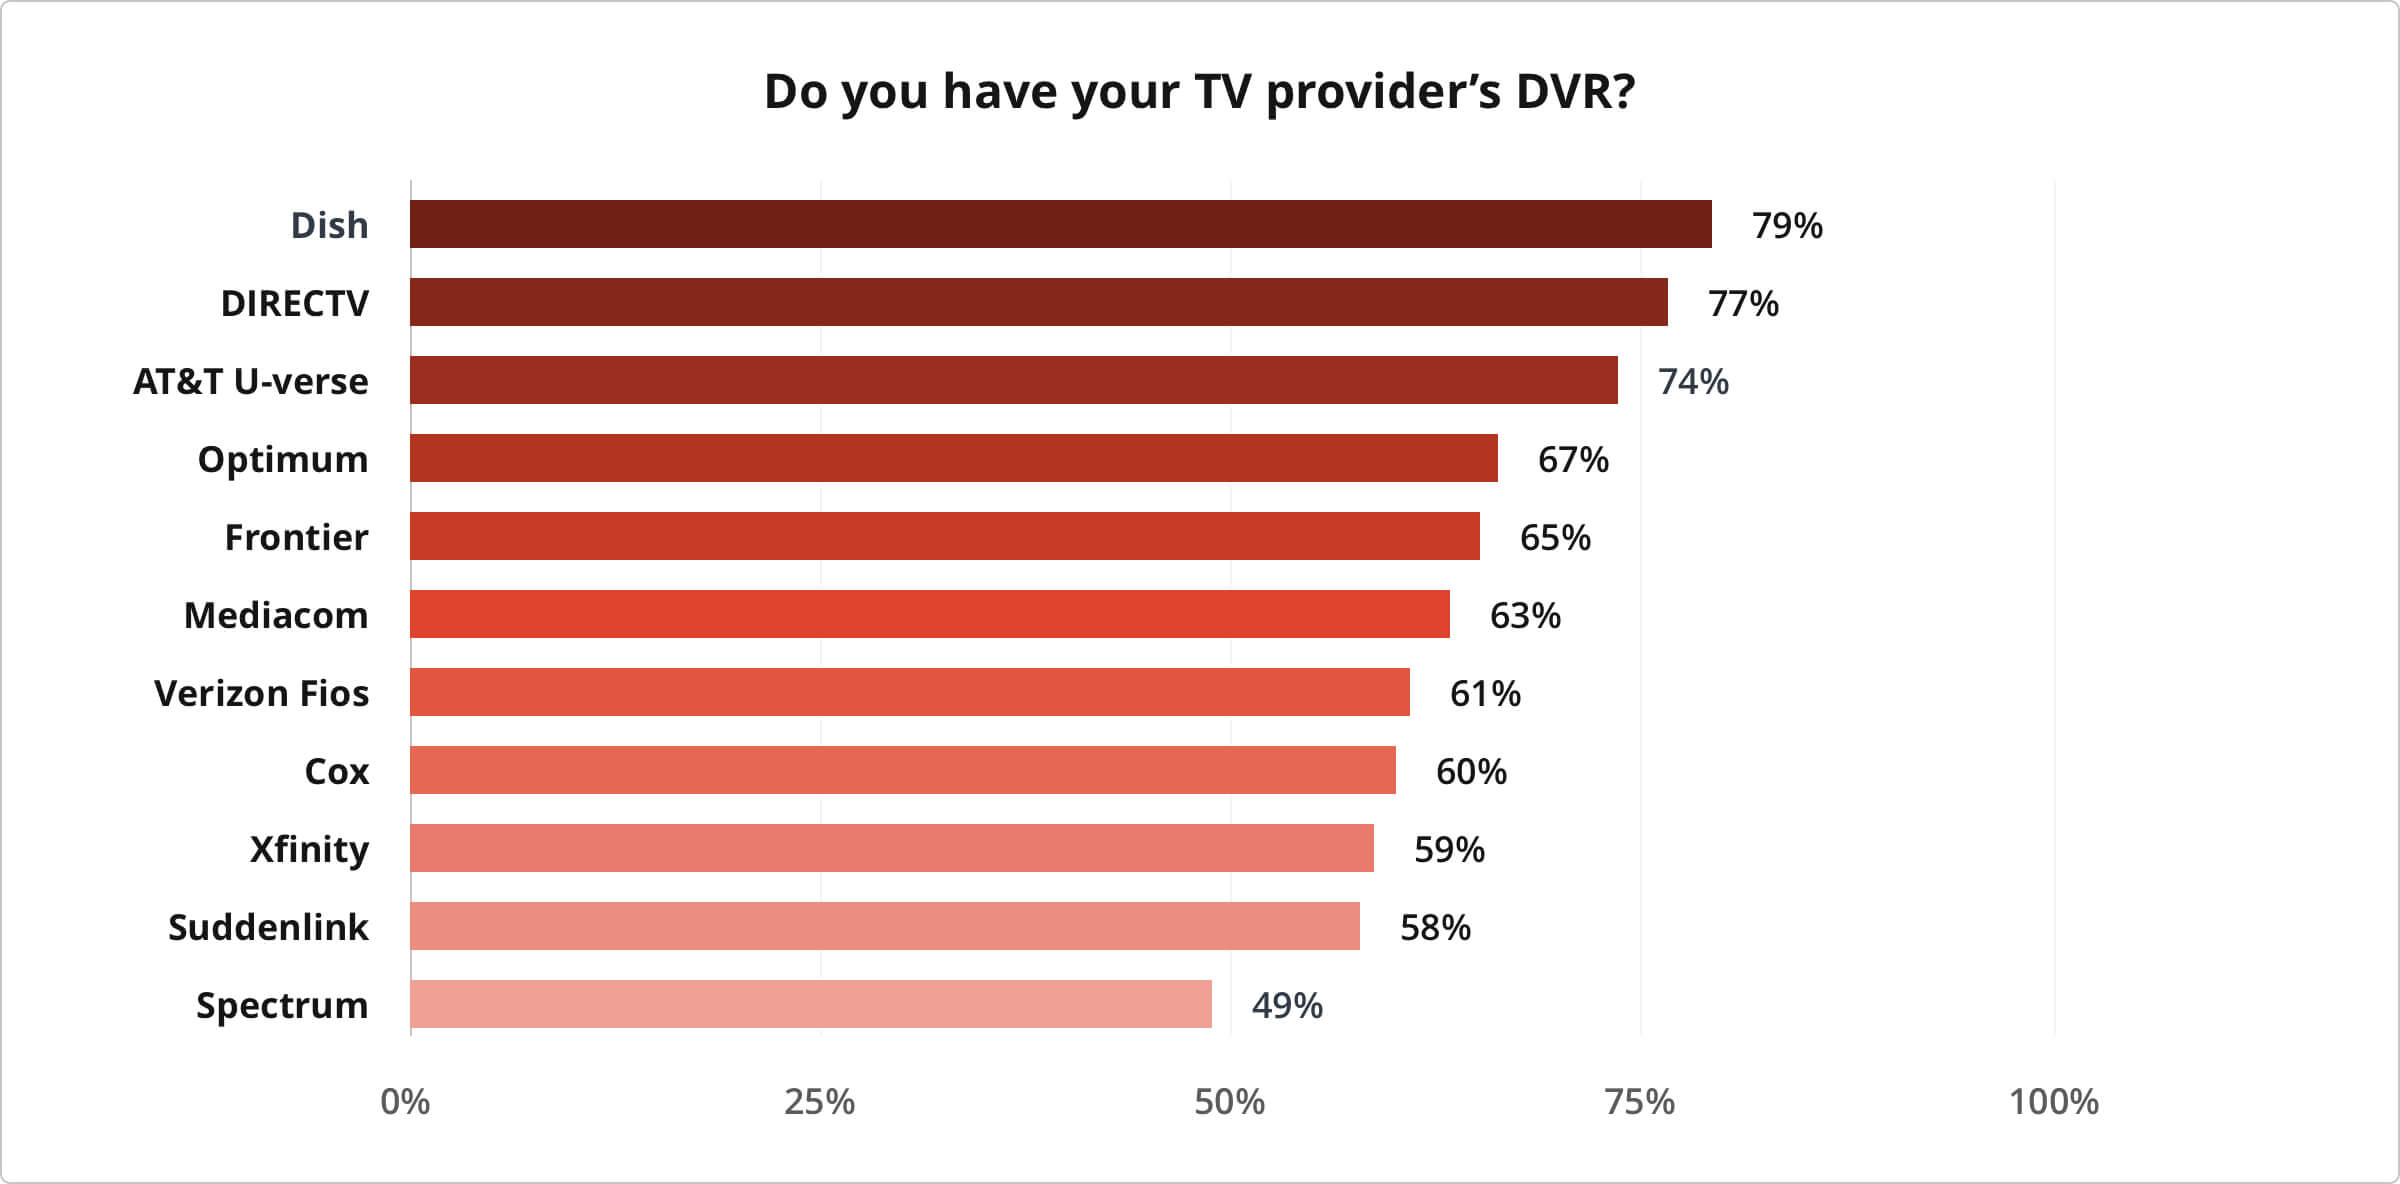 percentage of people who have their TV provider's DVR, parsed by provider type